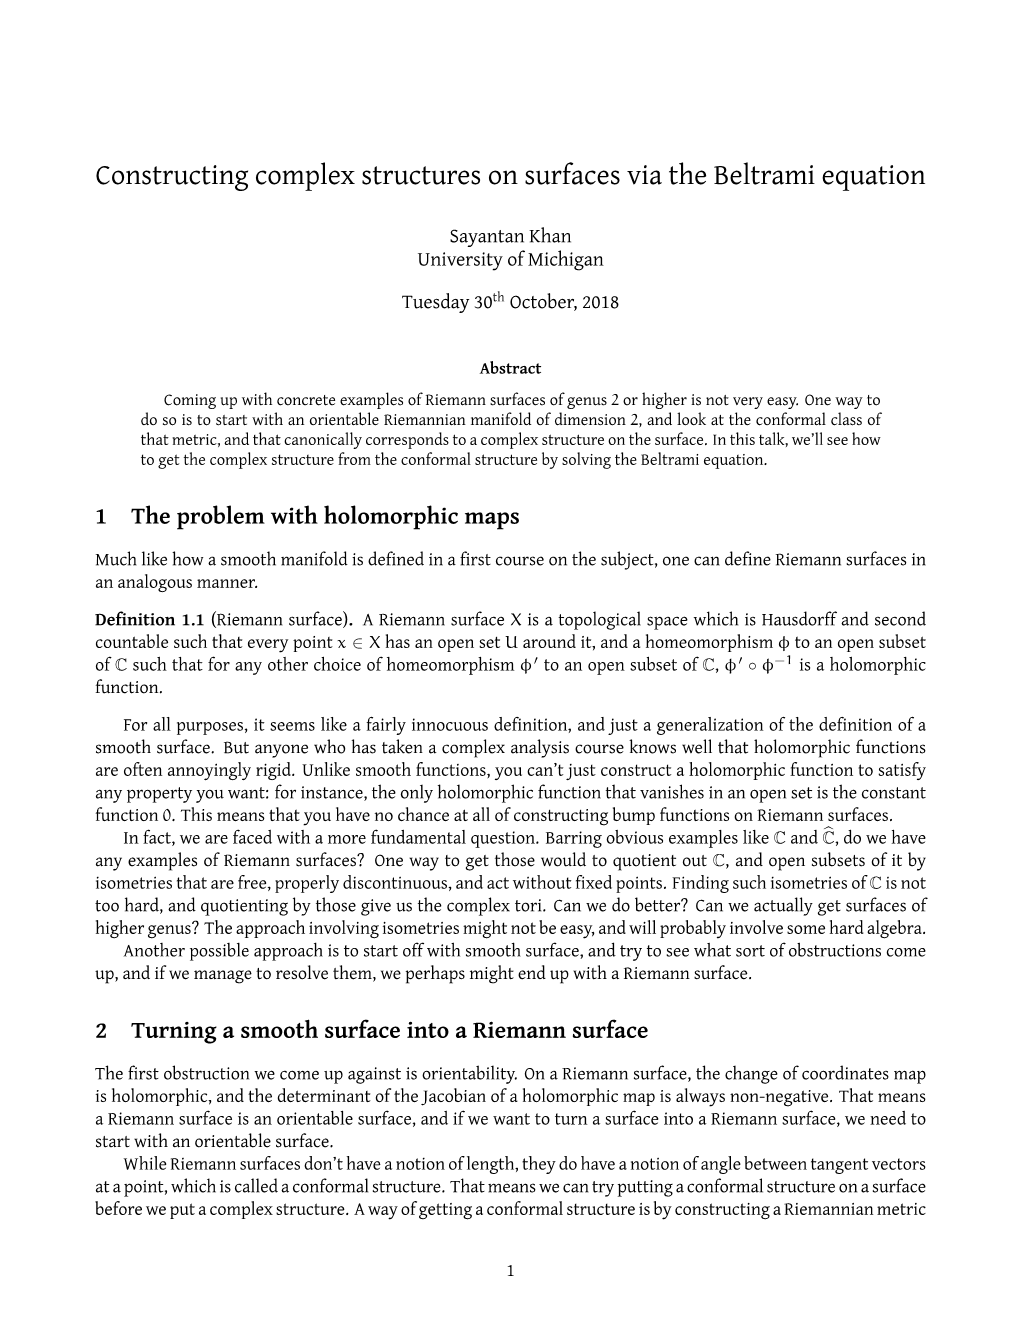 Constructing Complex Structures on Surfaces Via the Beltrami Equation